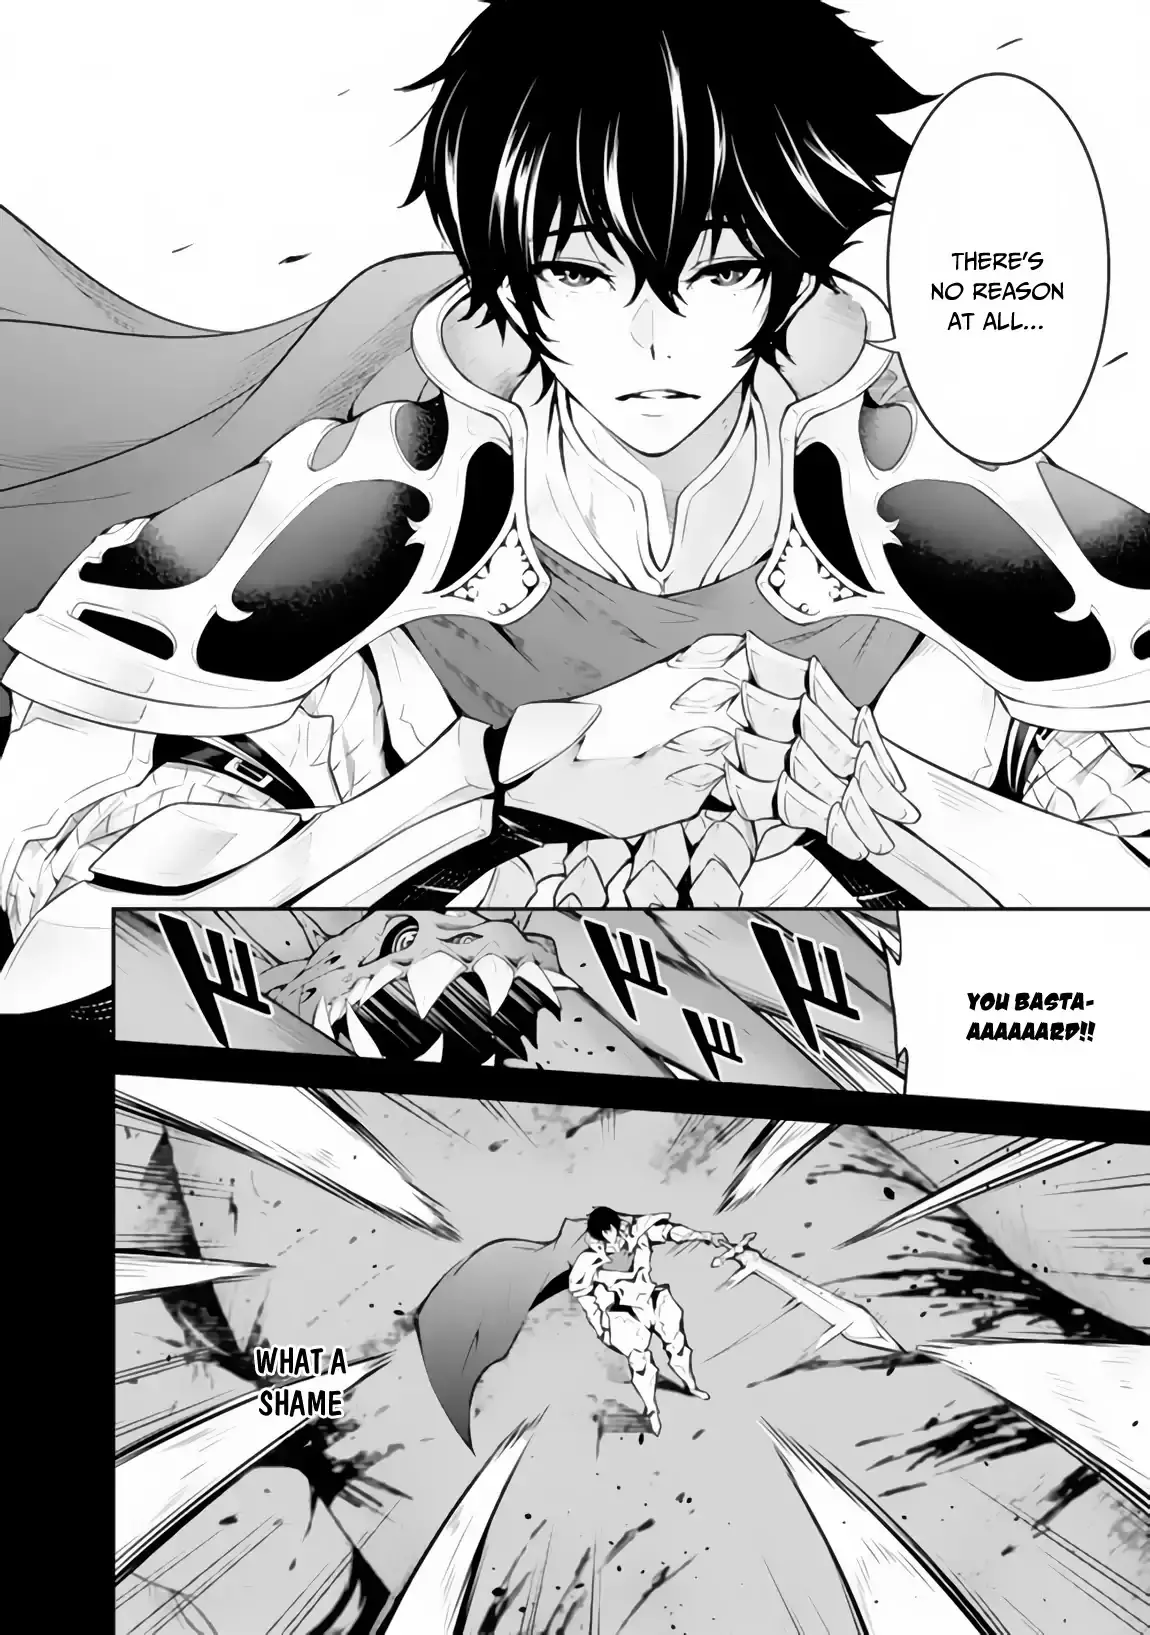 The Strongest Magical Swordsman Ever Reborn As An F-Rank Adventurer. - 1 page 7